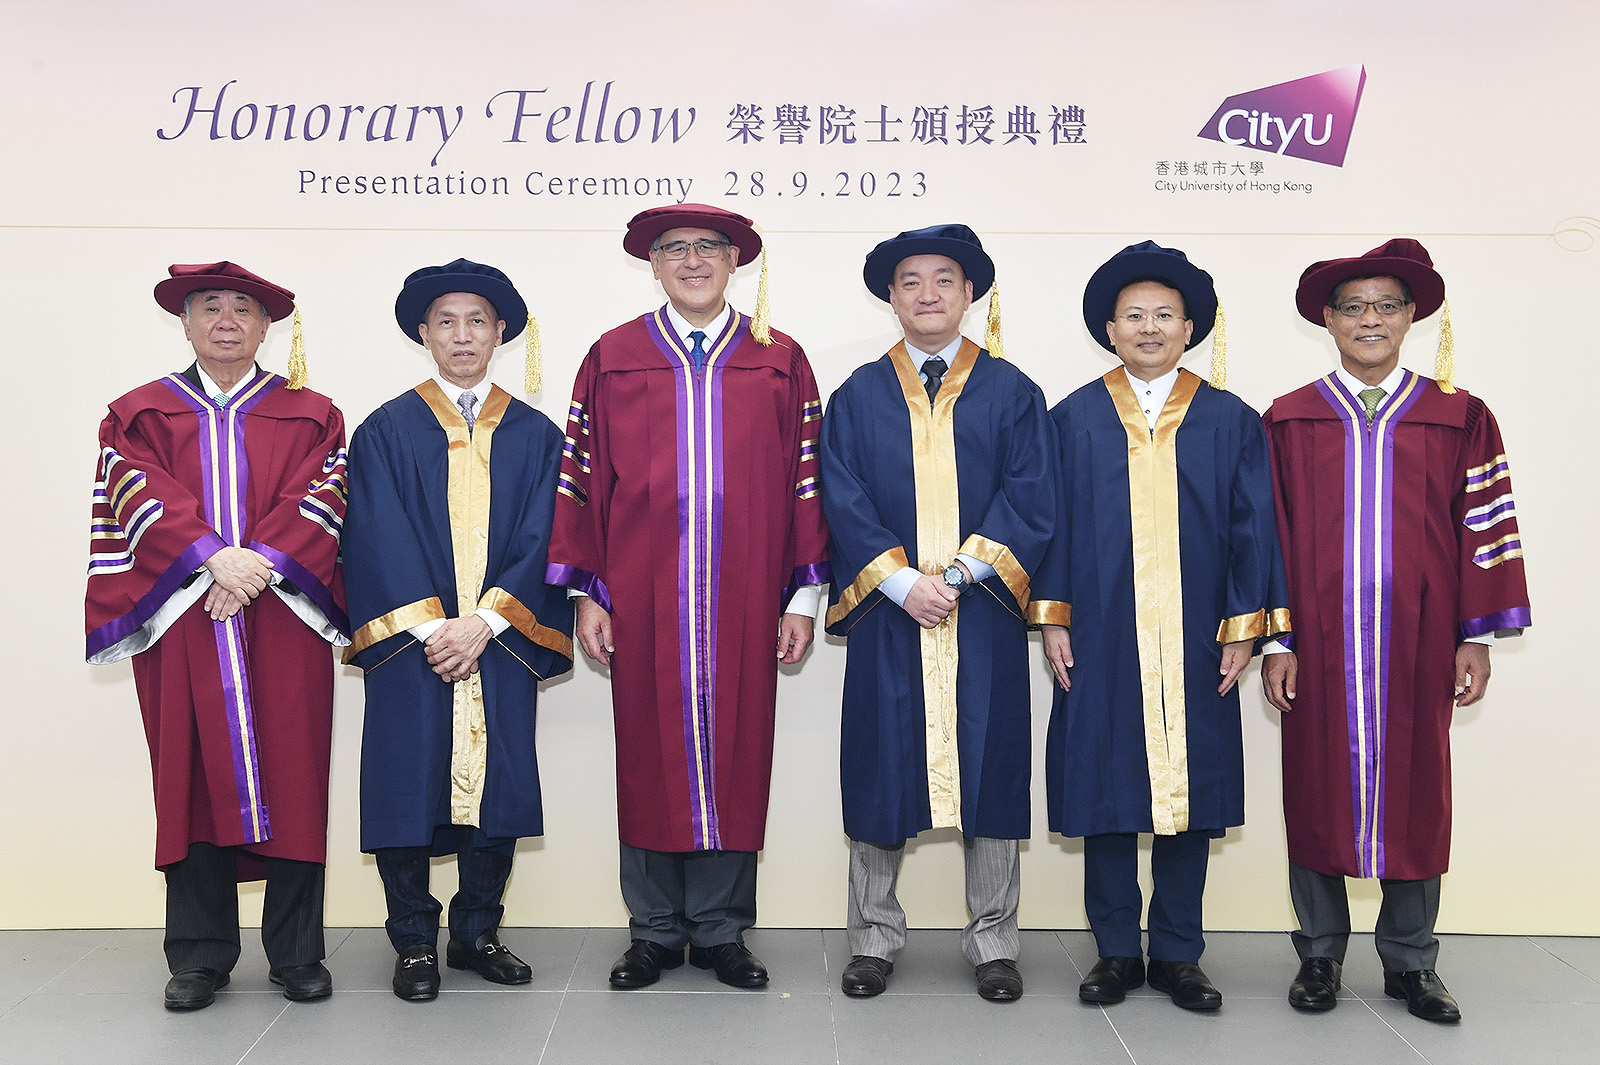 (From left) President Freddy Boey, Professor Tinly Wong Tin-chee, Mr Lester Garson Huang, Mr Dominic Pang Yat-ting, Mr Chan Yung, Mr Charles Chin Ying-on.